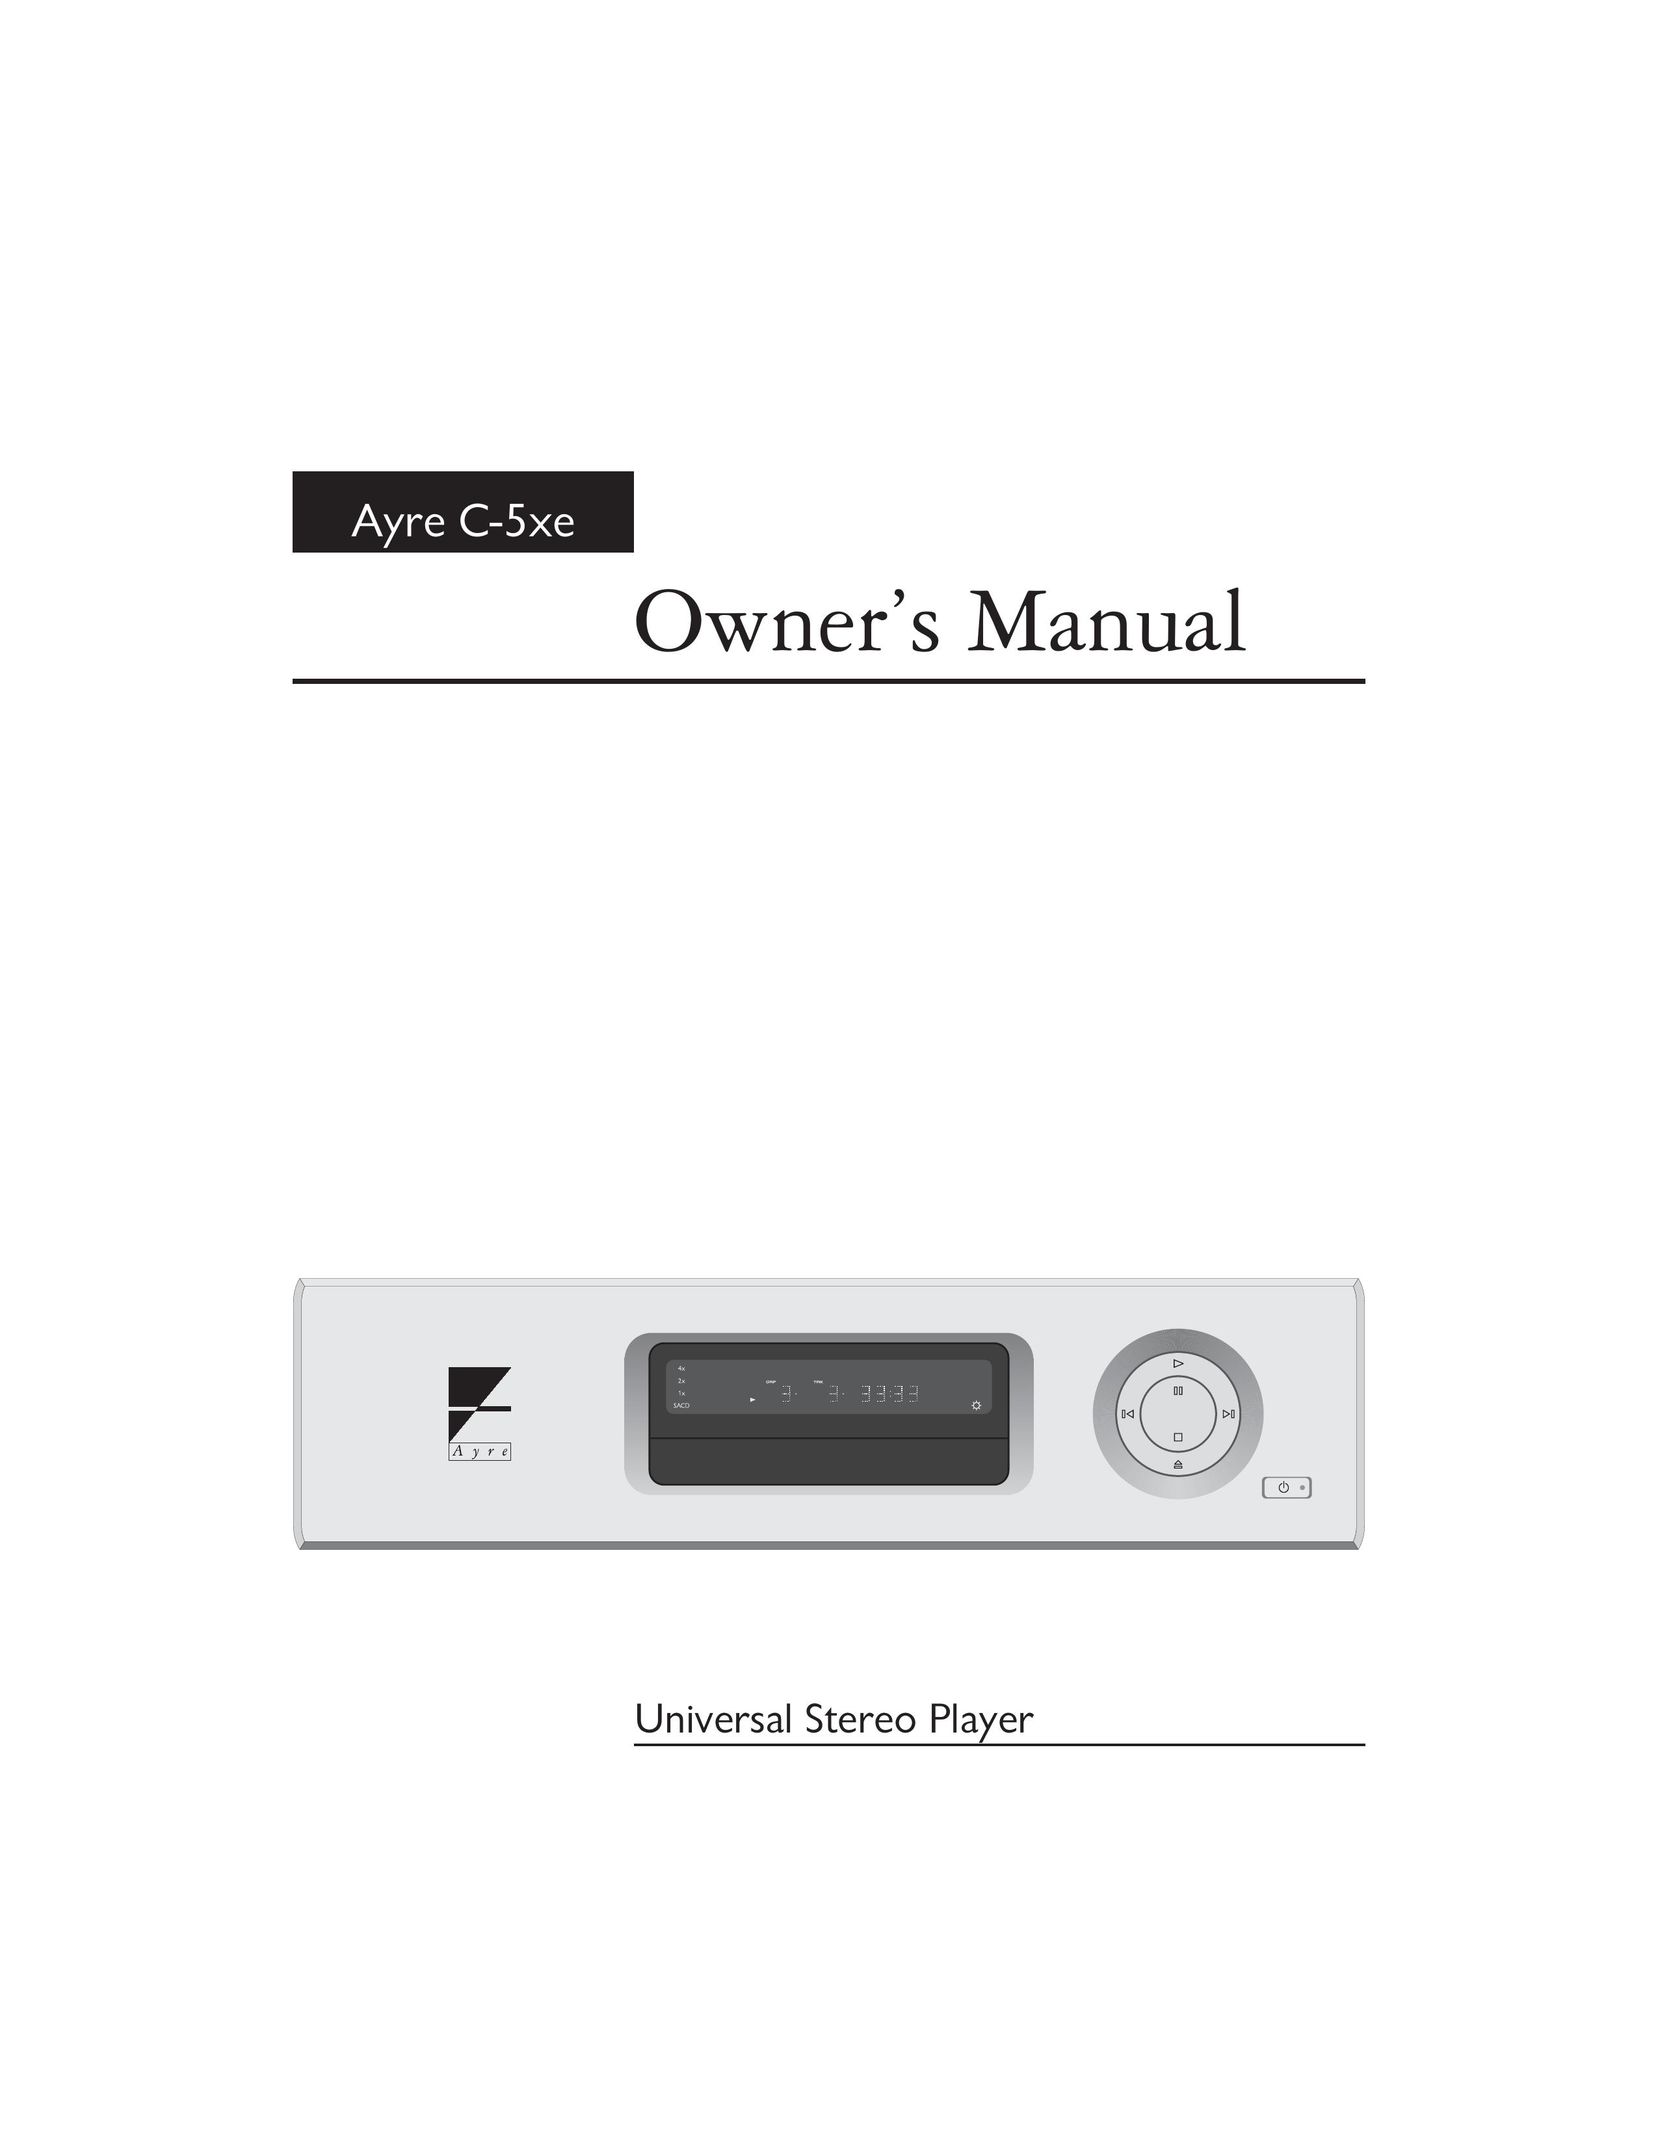 Ayre Acoustics C-5xe Stereo System User Manual